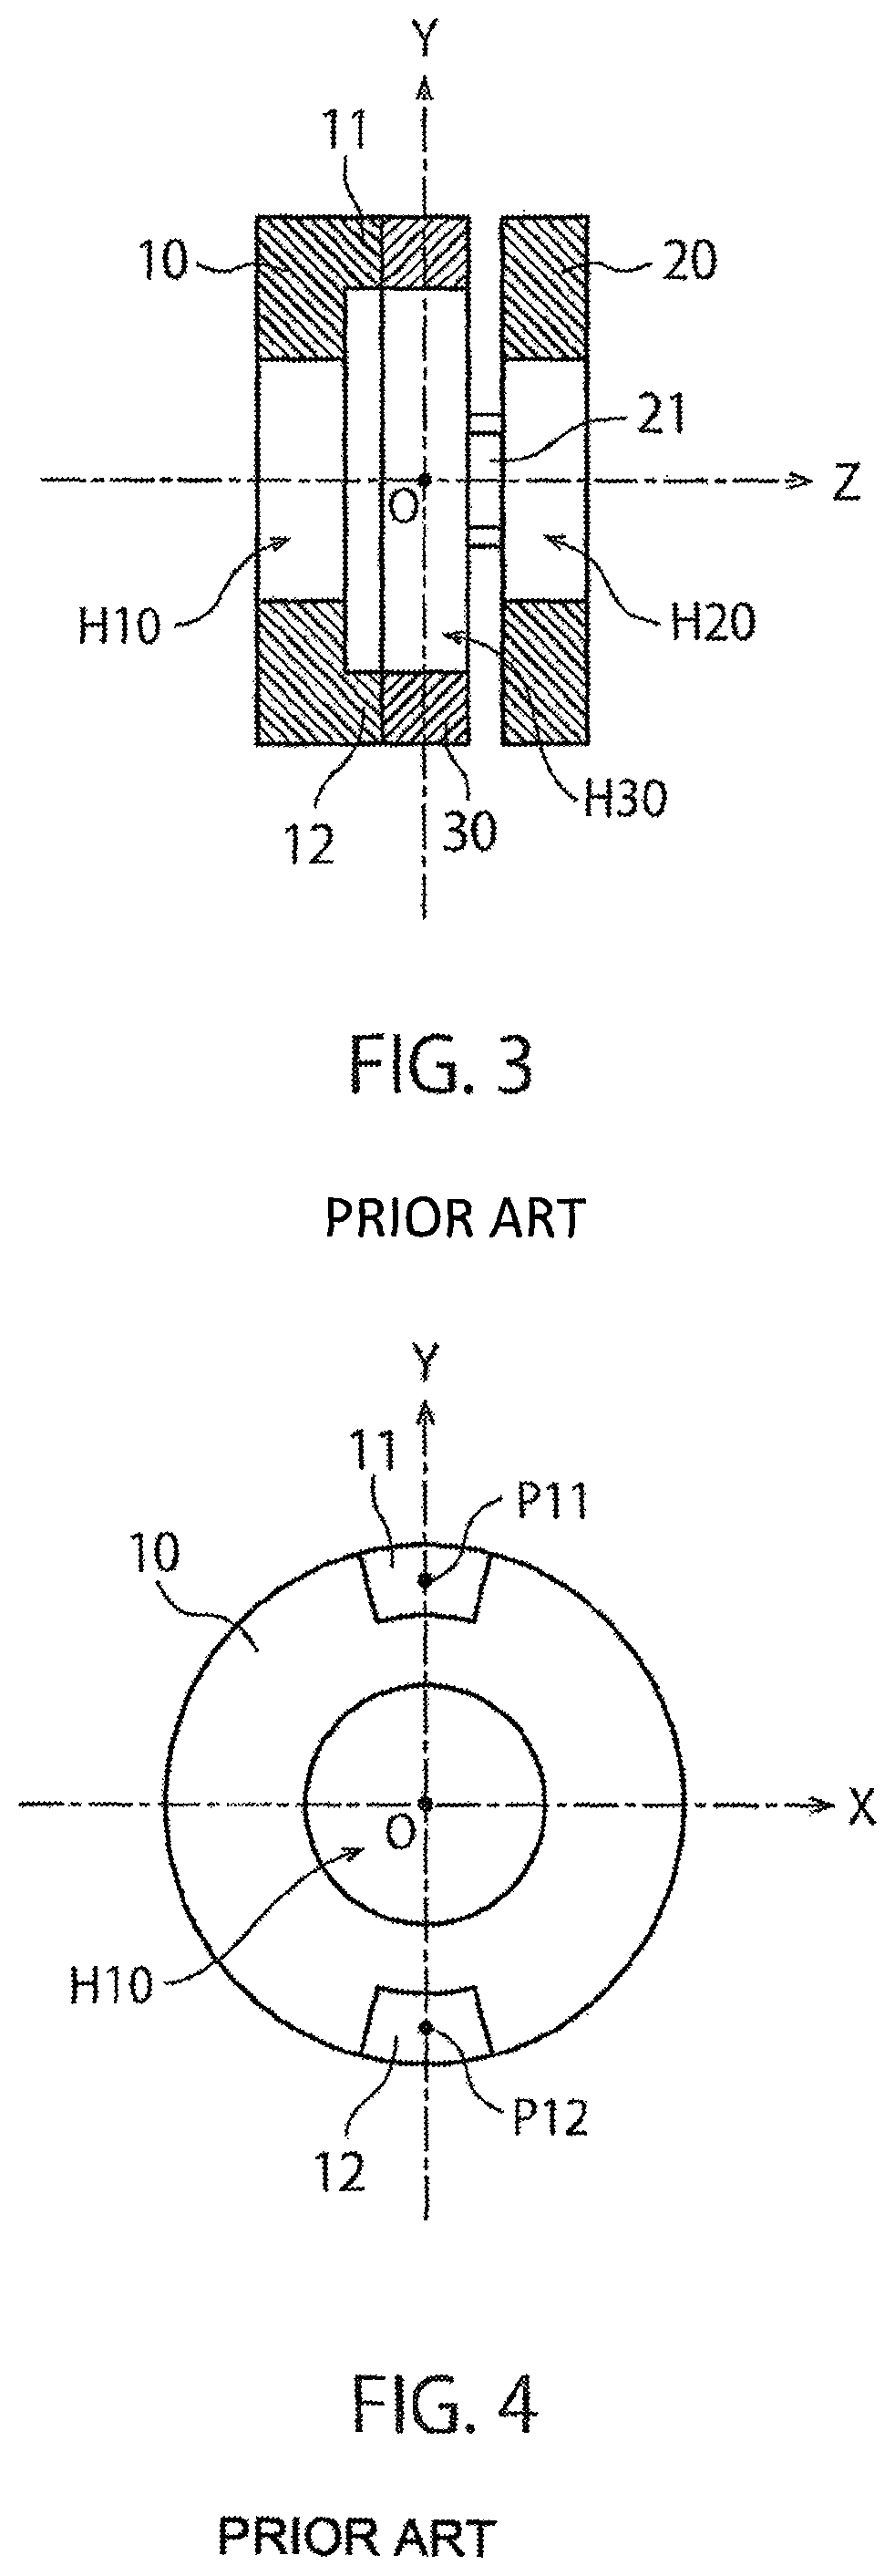 Torque sensor for detecting occurrence of metal fatigue in an elastic body